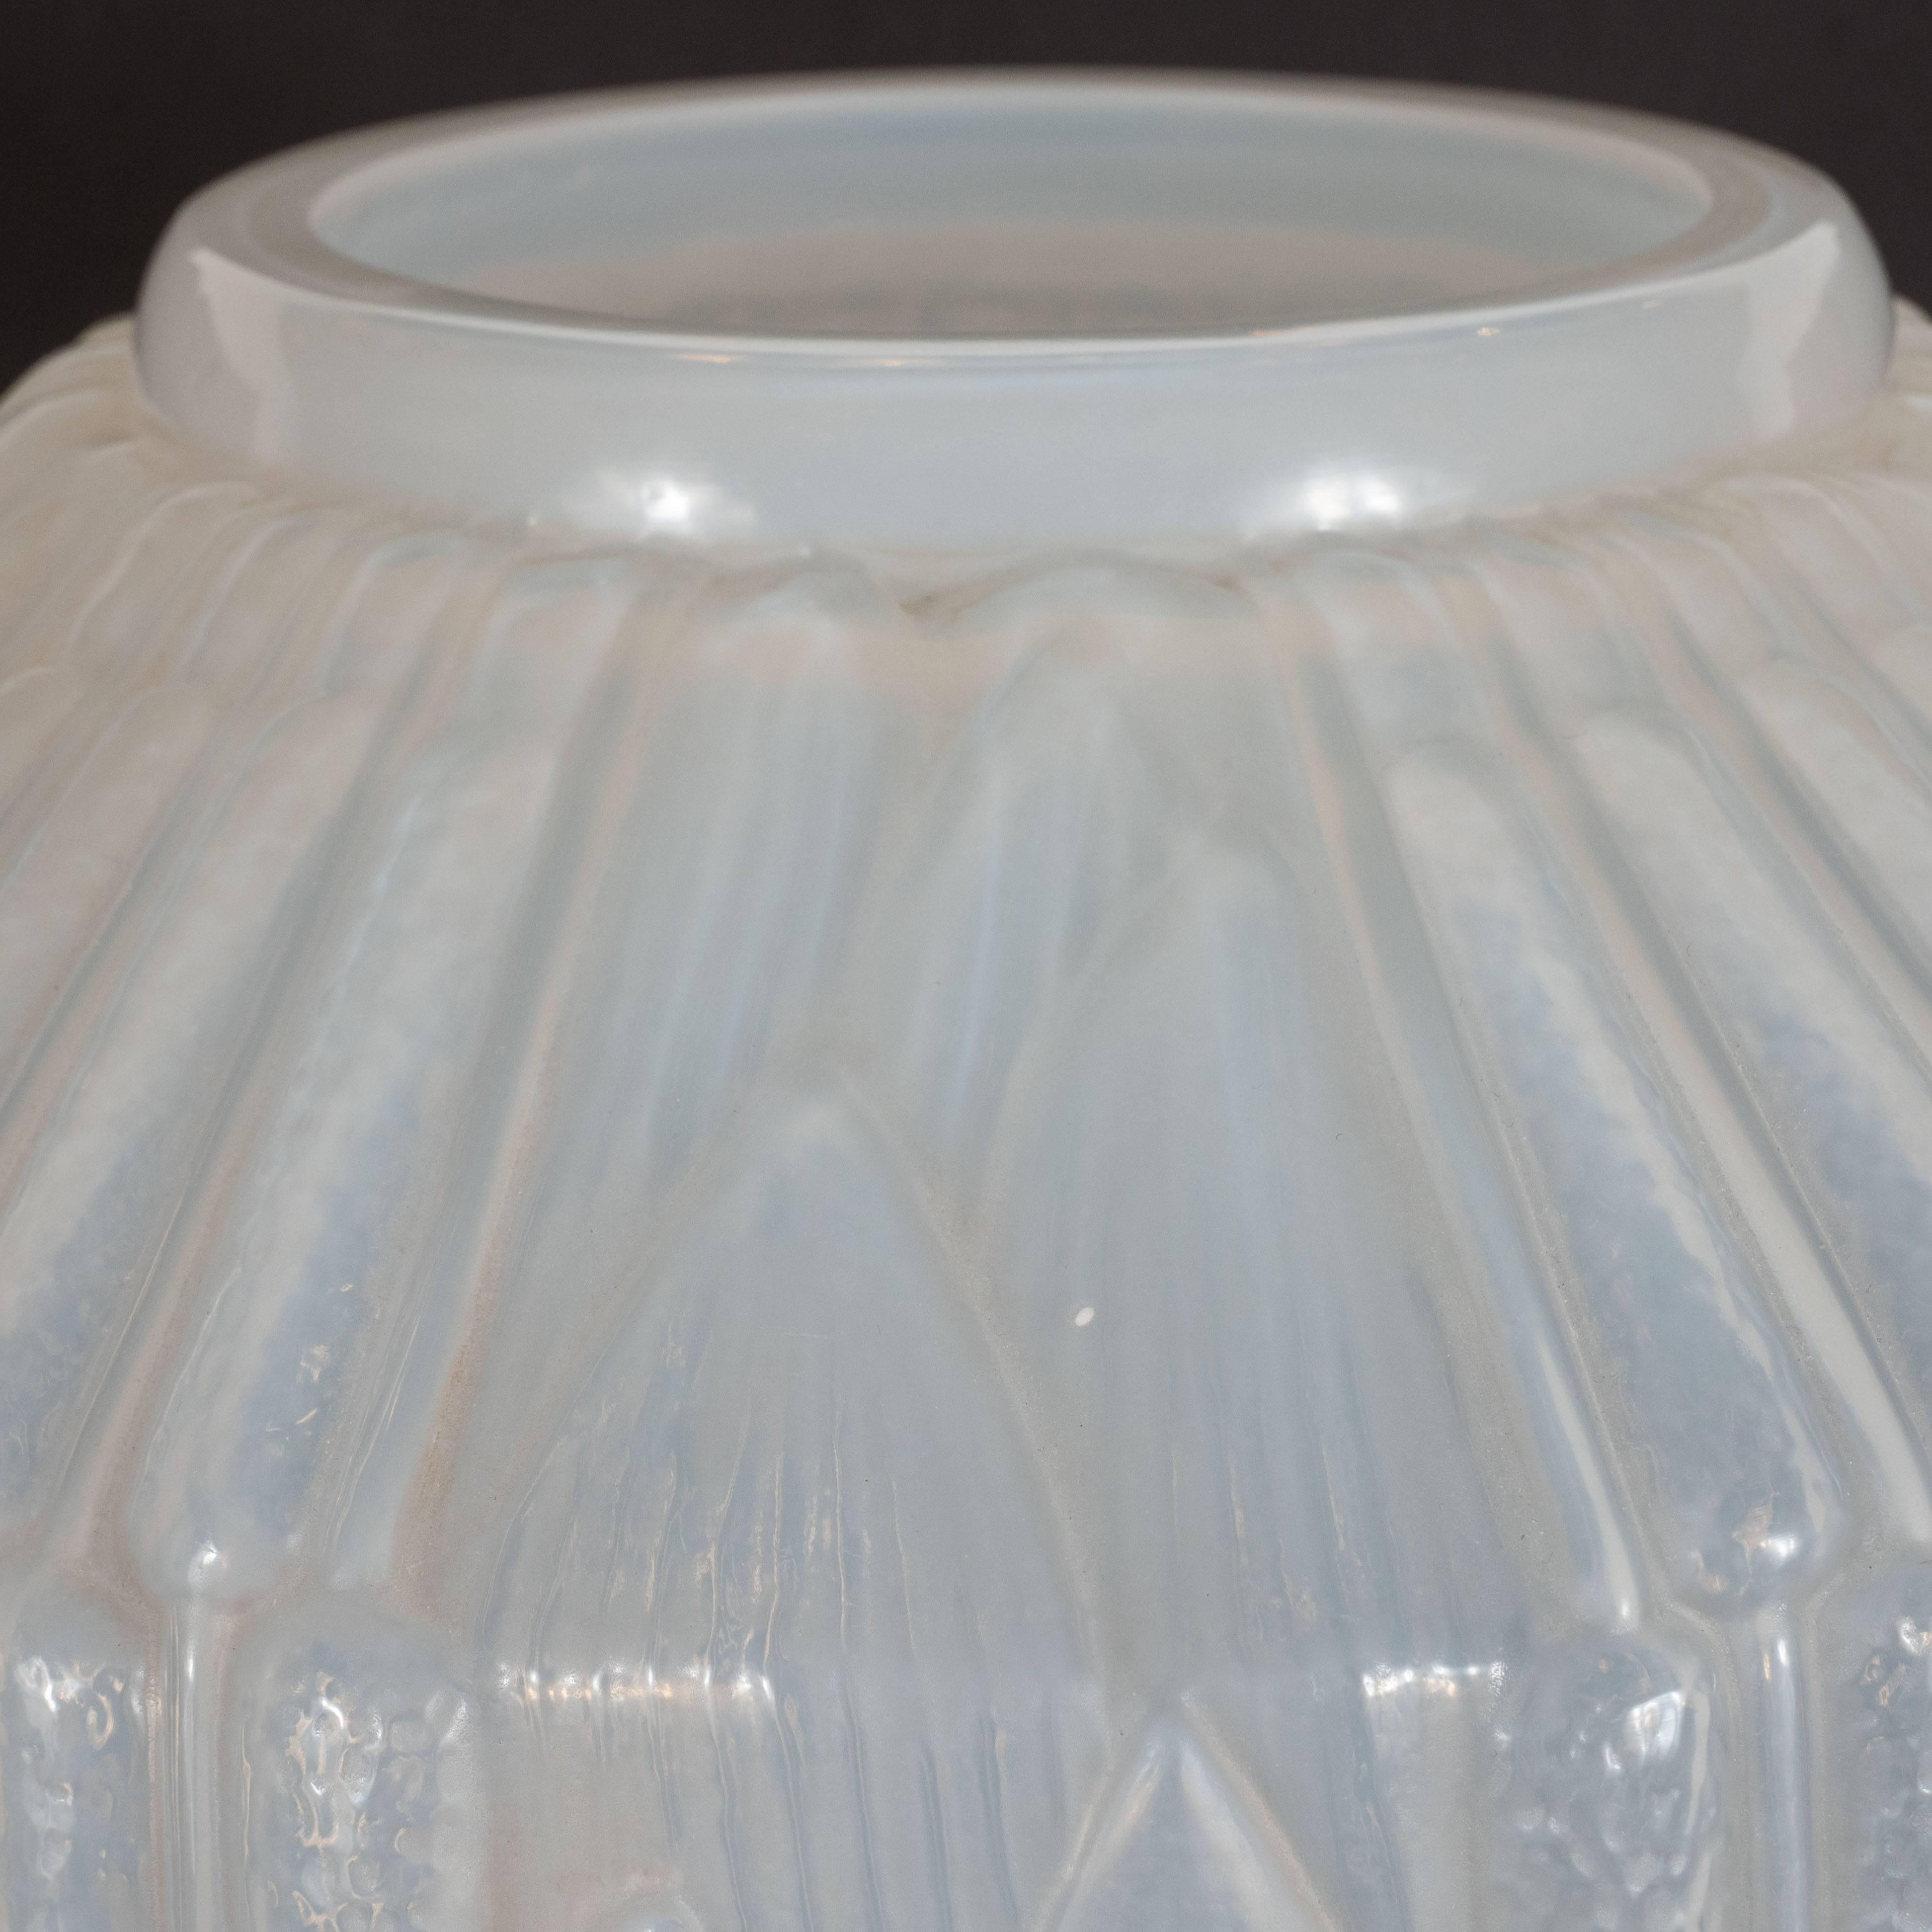 Mid-20th Century Art Deco Opalescent Handblown Vase with Geometric Patterns by Andre Hunebelle